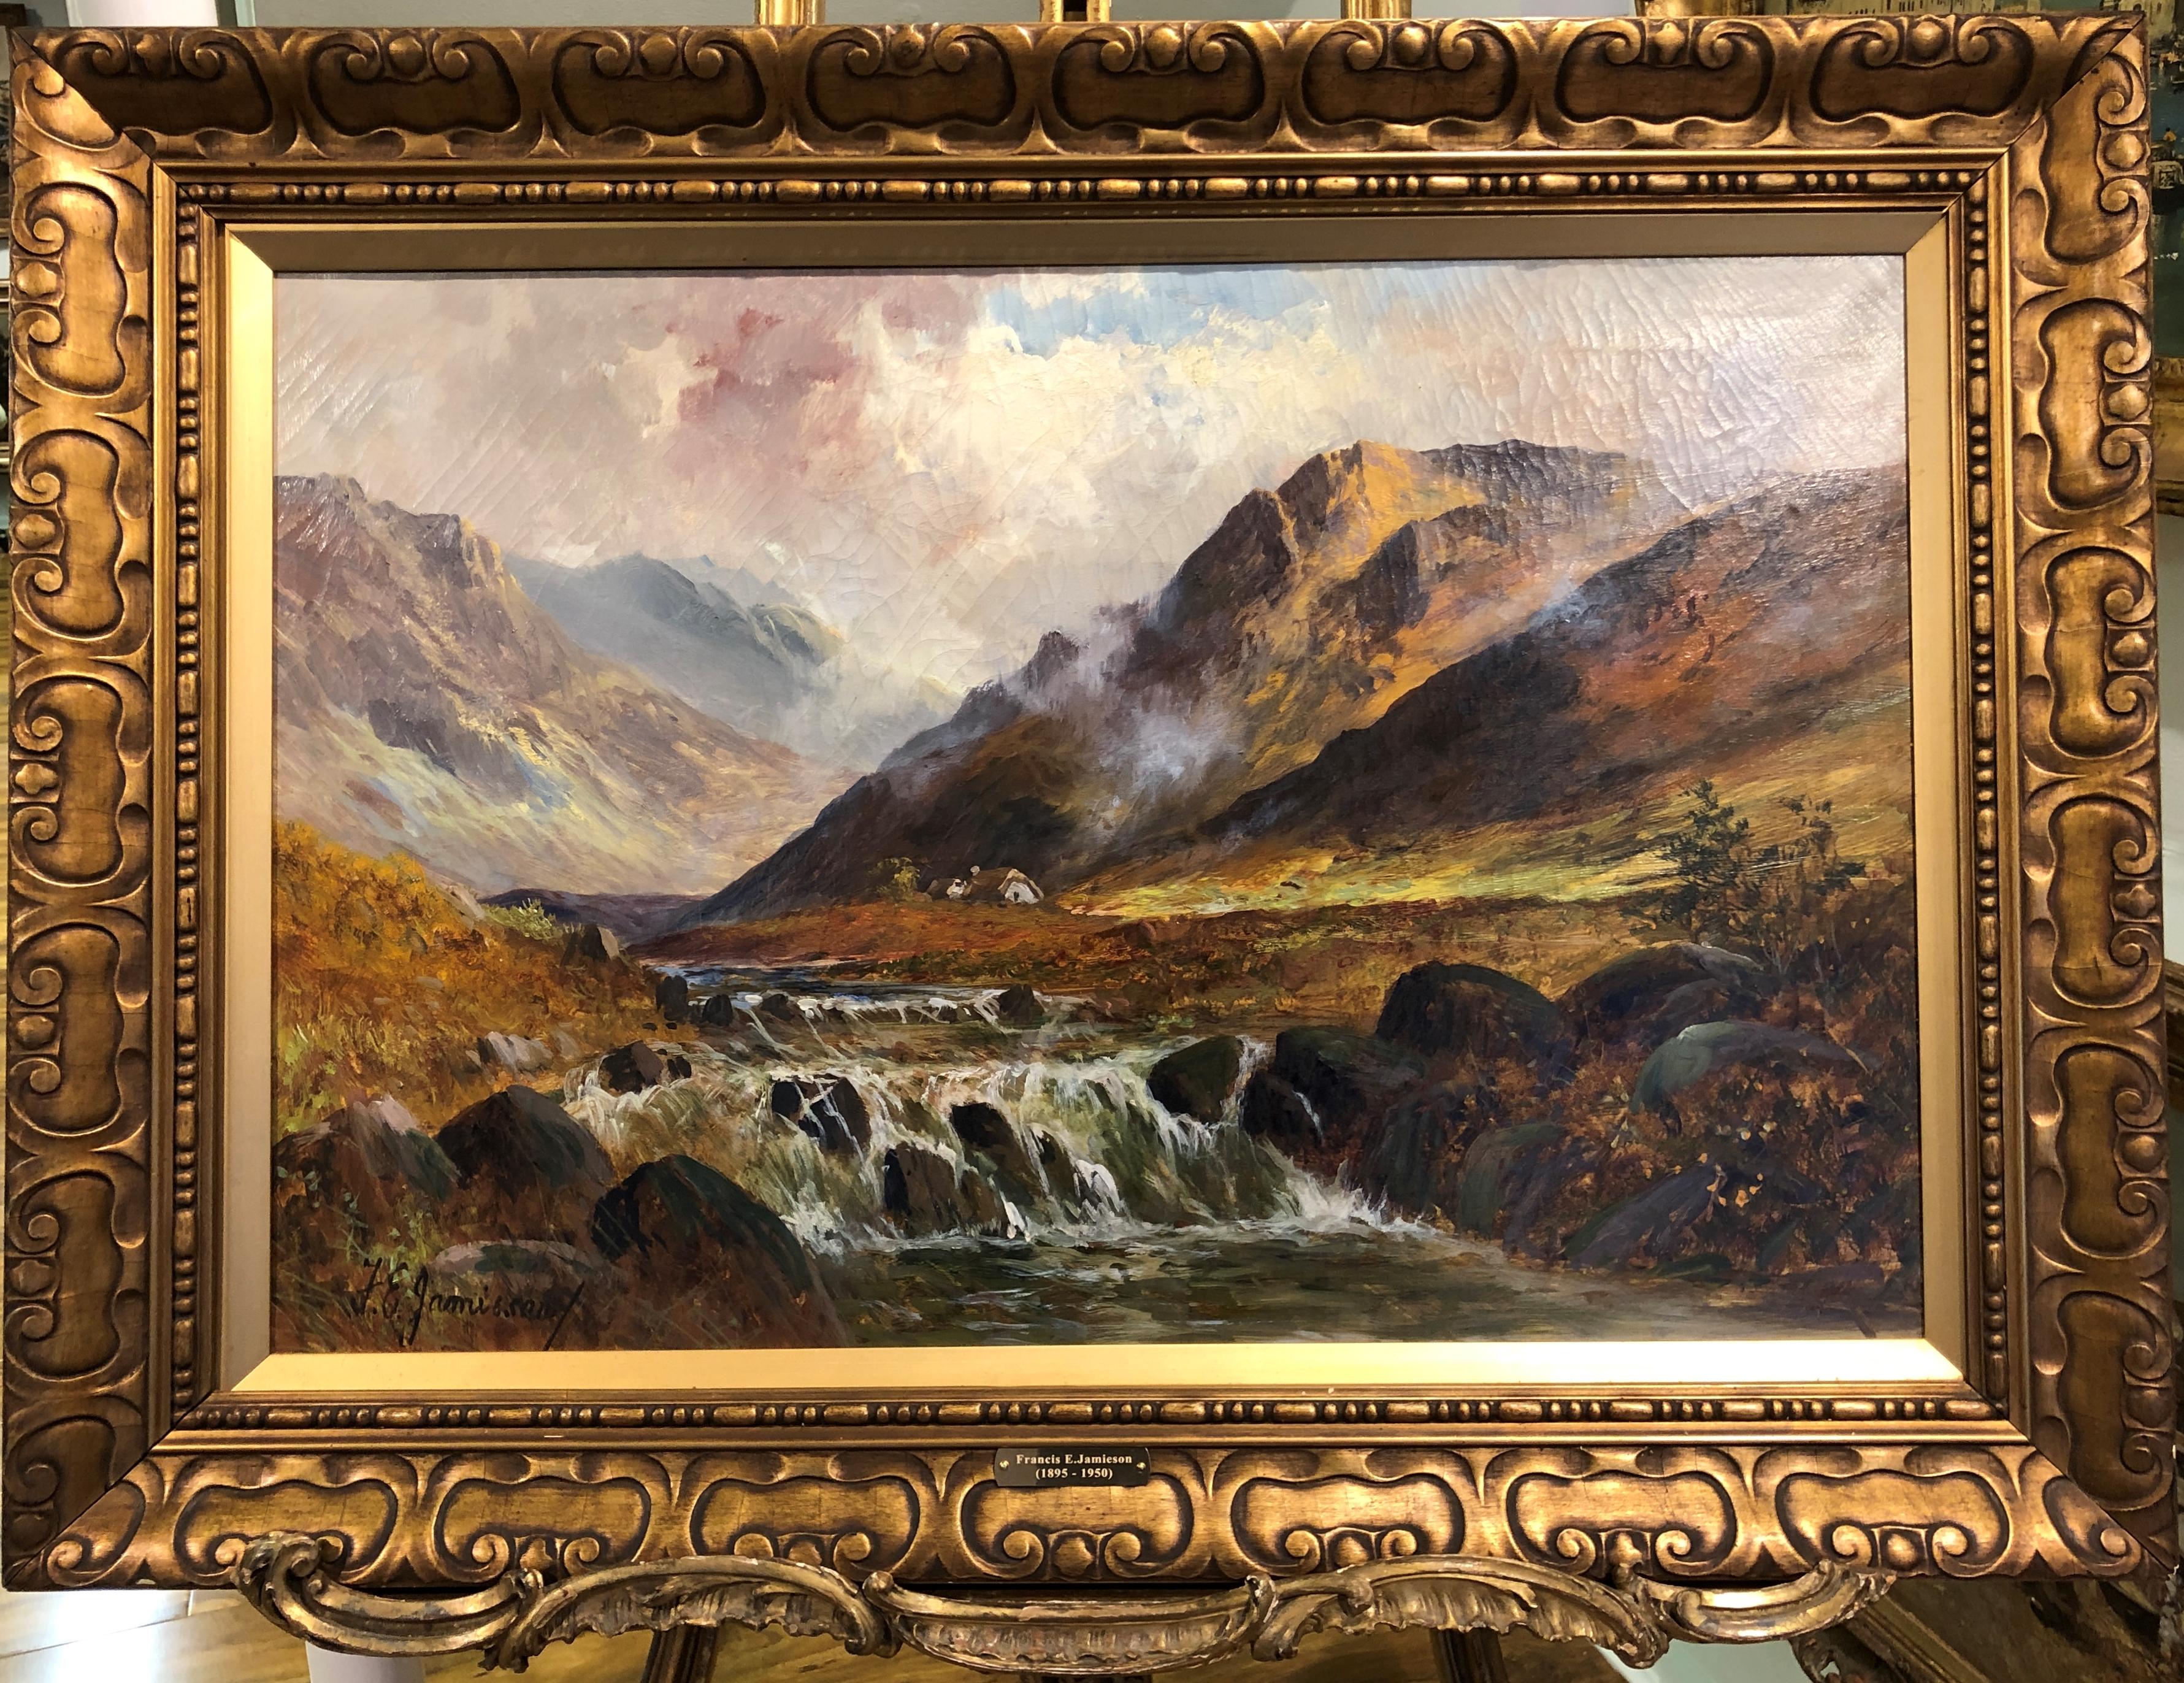 francis E Jamieson Landscape Painting - LARGE FINE ANTIQUE 19th CENTURY BY Francis E. Jamieson OLD SCOTTISH OIL PAINTING